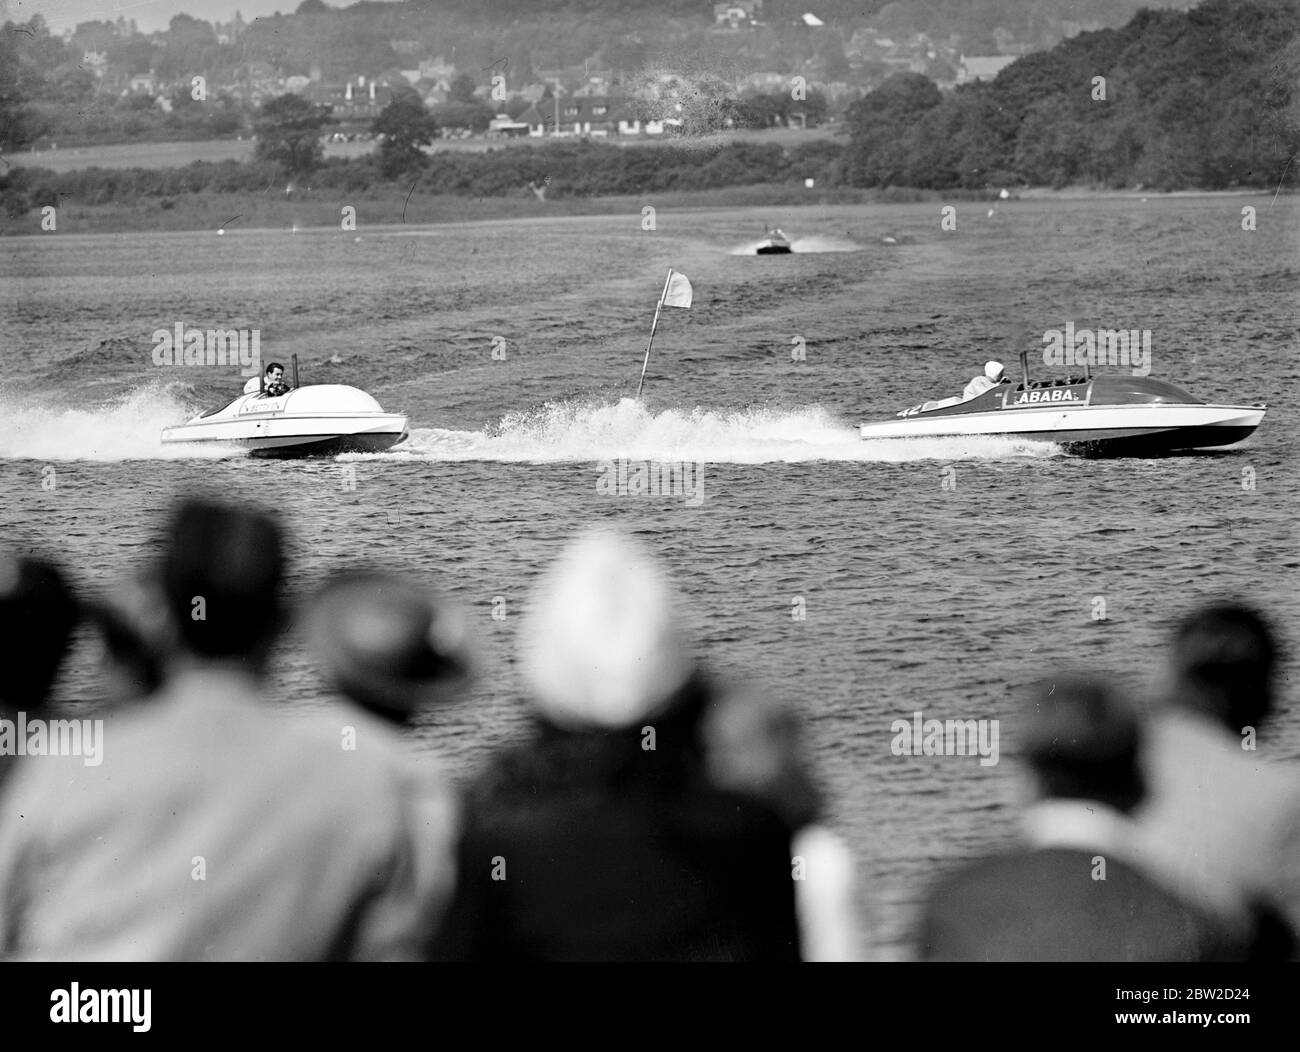 The first race meeting of modern hydroplane to take place near London was held on to Ruislip reservoir. The meeting was organised by the British Hydroplane Racing Club in cooperation was this group of men connected with the Royal Motor Yacht club (of which the King is Admiral). Photo shows: Ababa, piloted by Mr Alan Bristow, making the turn at speed to beat Betty III, piloted by Lieutenant E Verdon Roe, in the First Ruislip 4 L handicap. 1 July 1939 Stock Photo